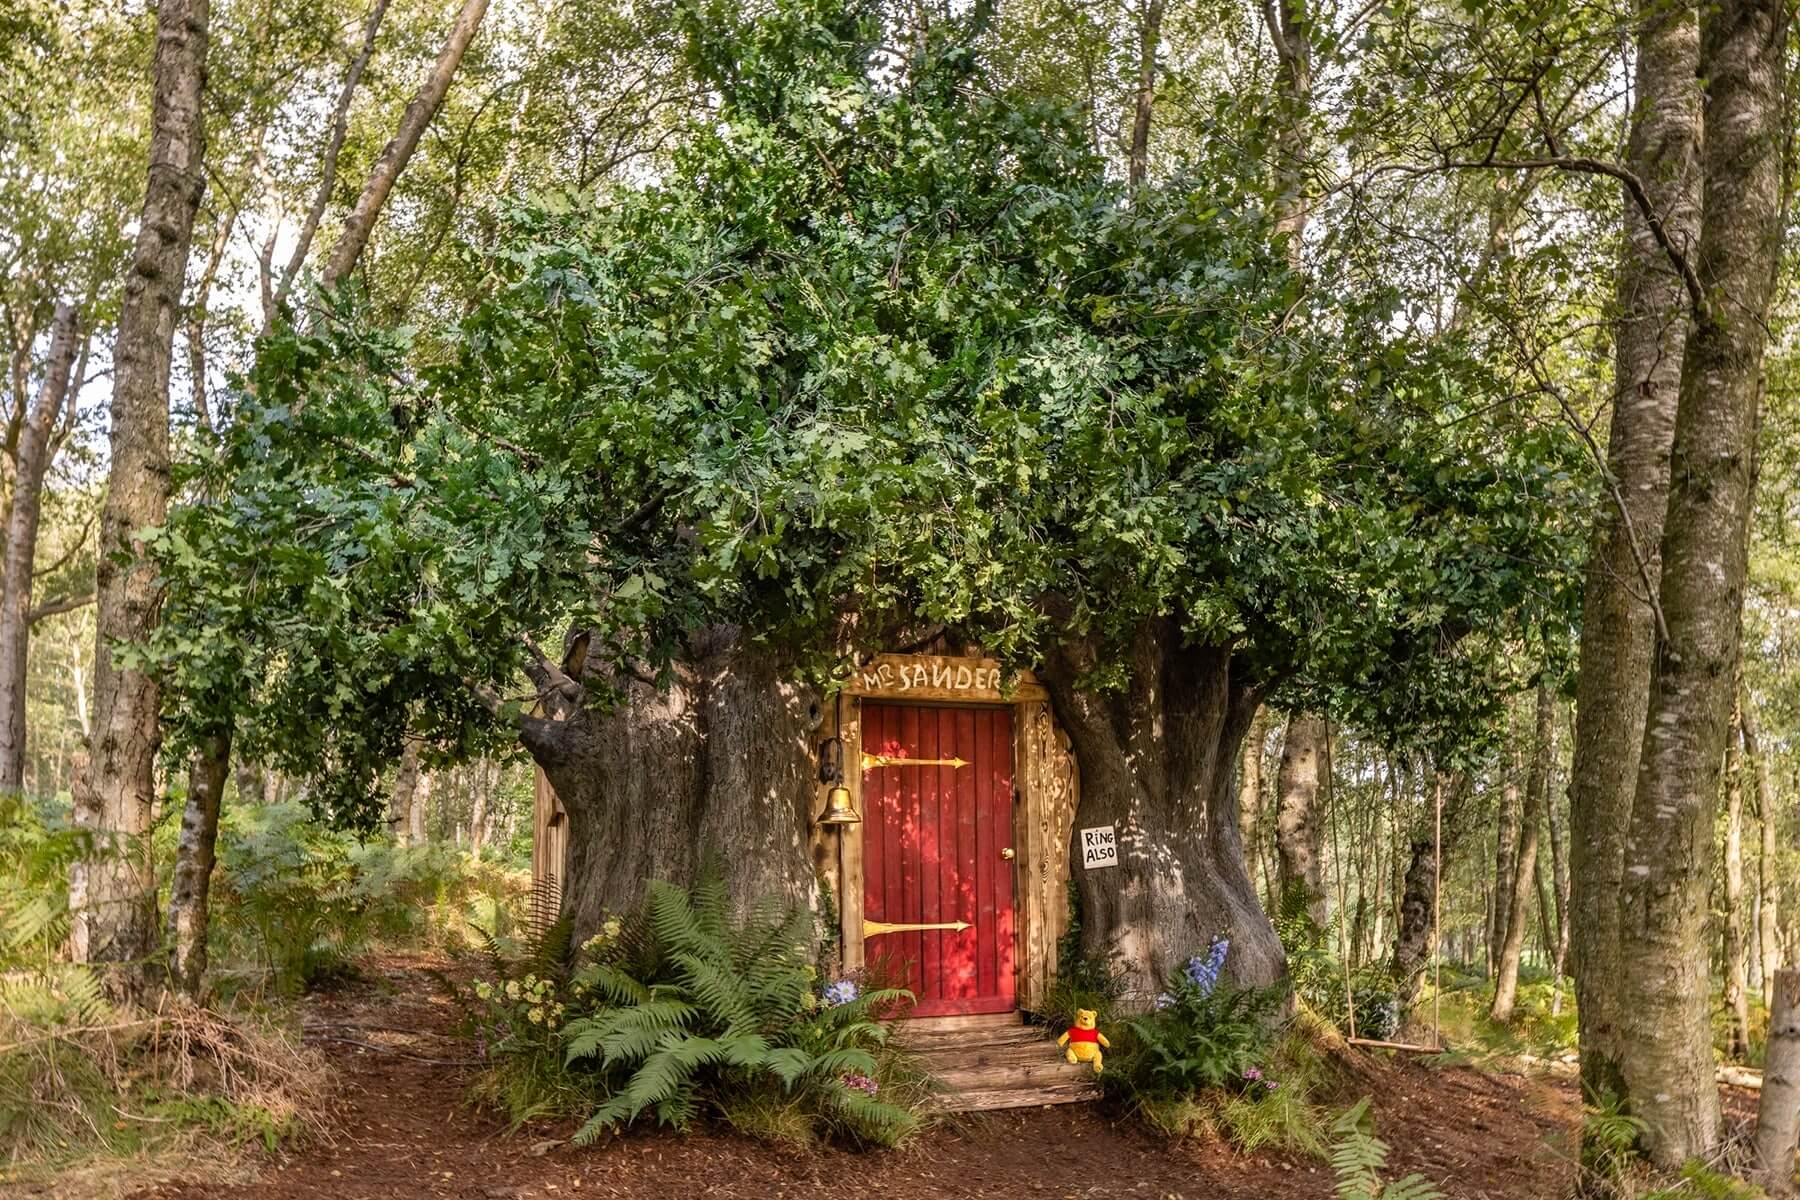 Spend a night in the original Hundred Acre Wood as part of Winnie the Pooh’s 95th Anniversary Celebrations